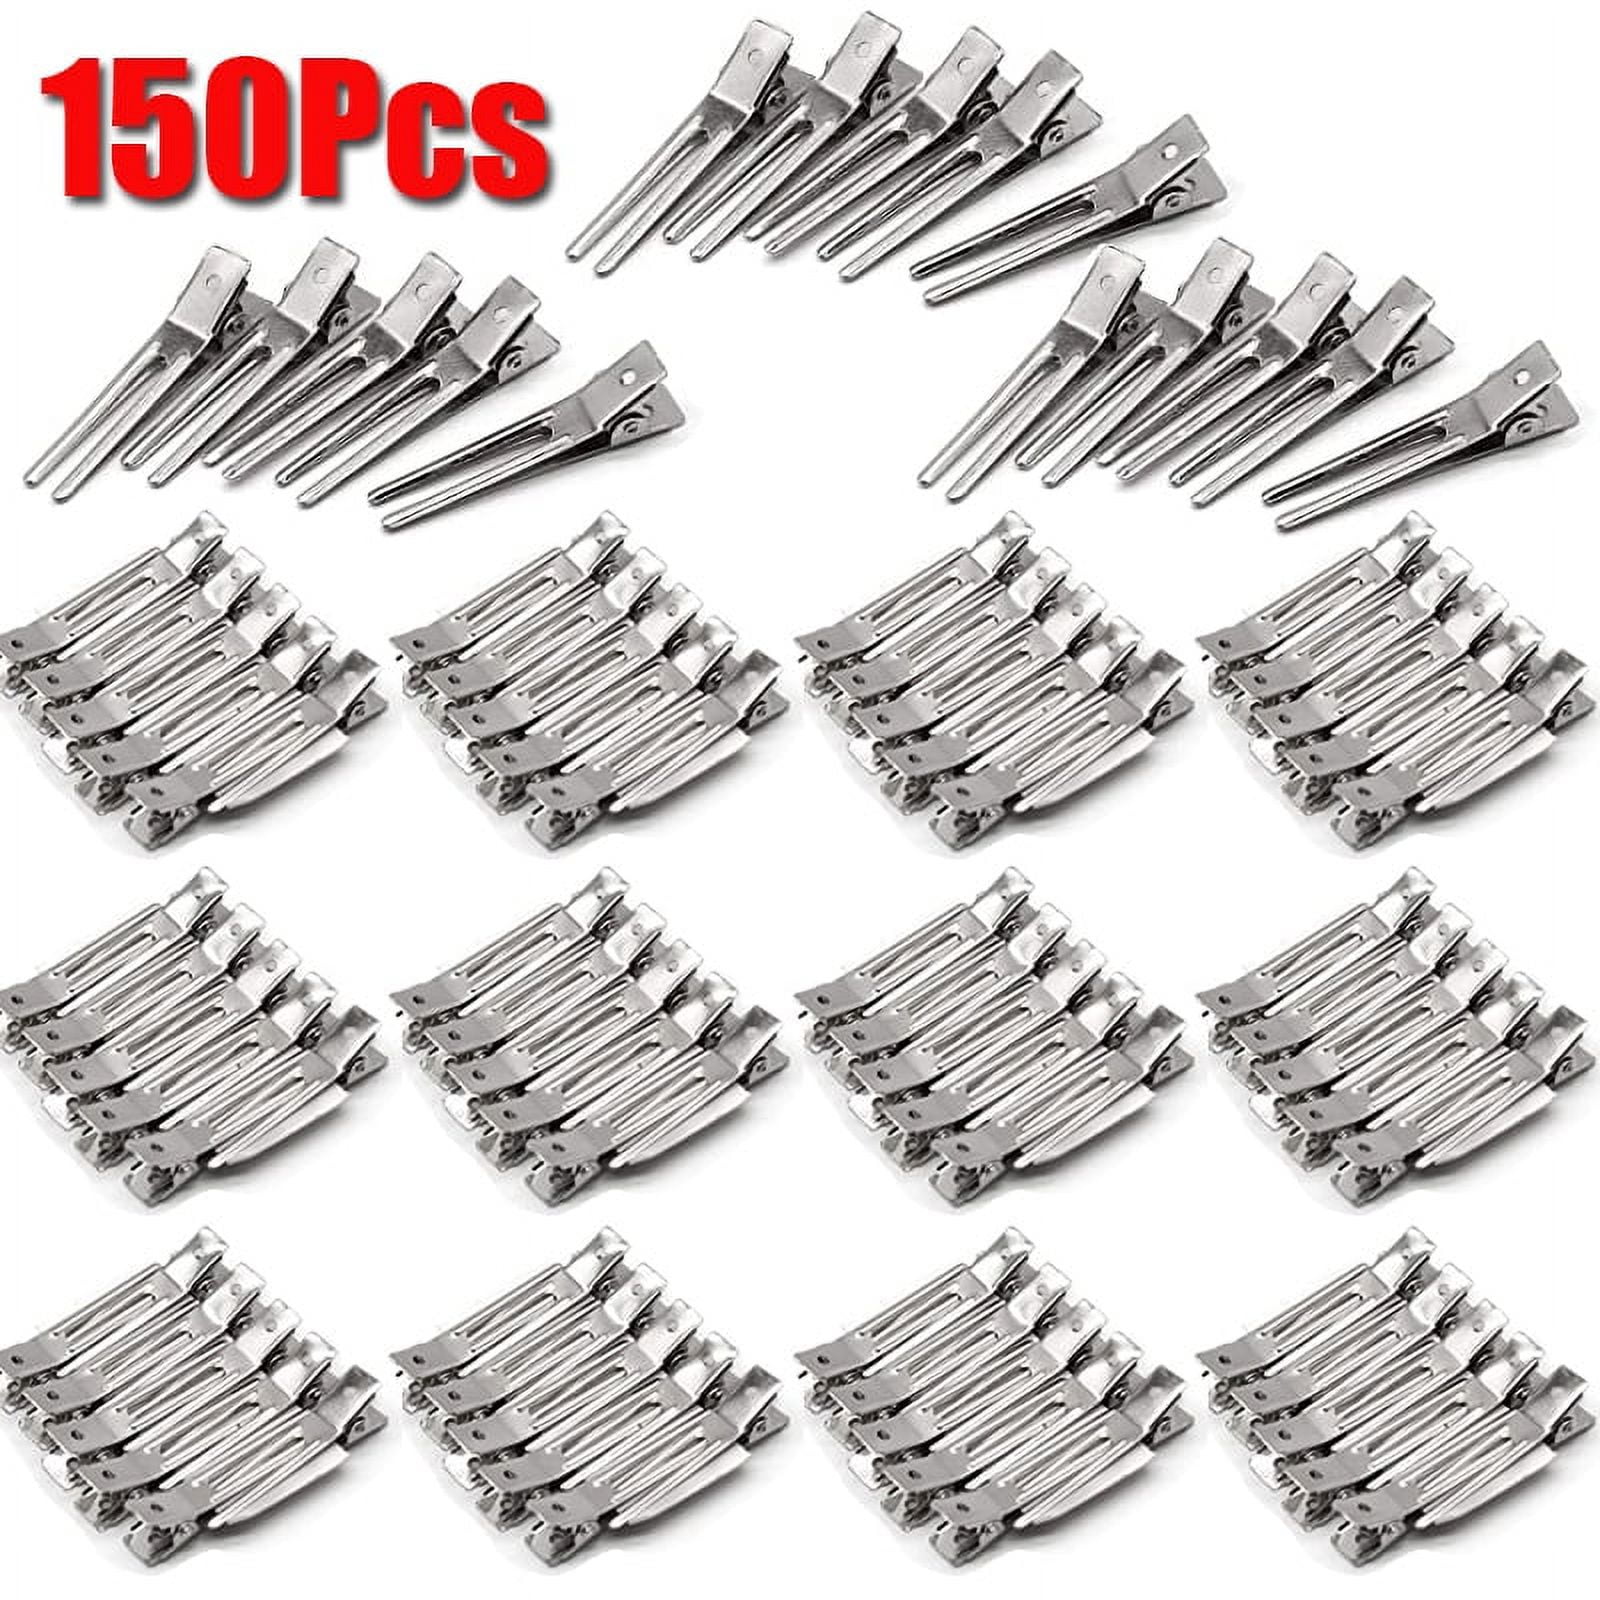 65 Pcs Metal Silver Hair Clips for Women Pin Curl Roller 1.8 Inches Double  Prong Root Lift Clips for Curly Hair Volume Loc Clips for Locs Retwist  Dreads Short Curler Setting Clippies